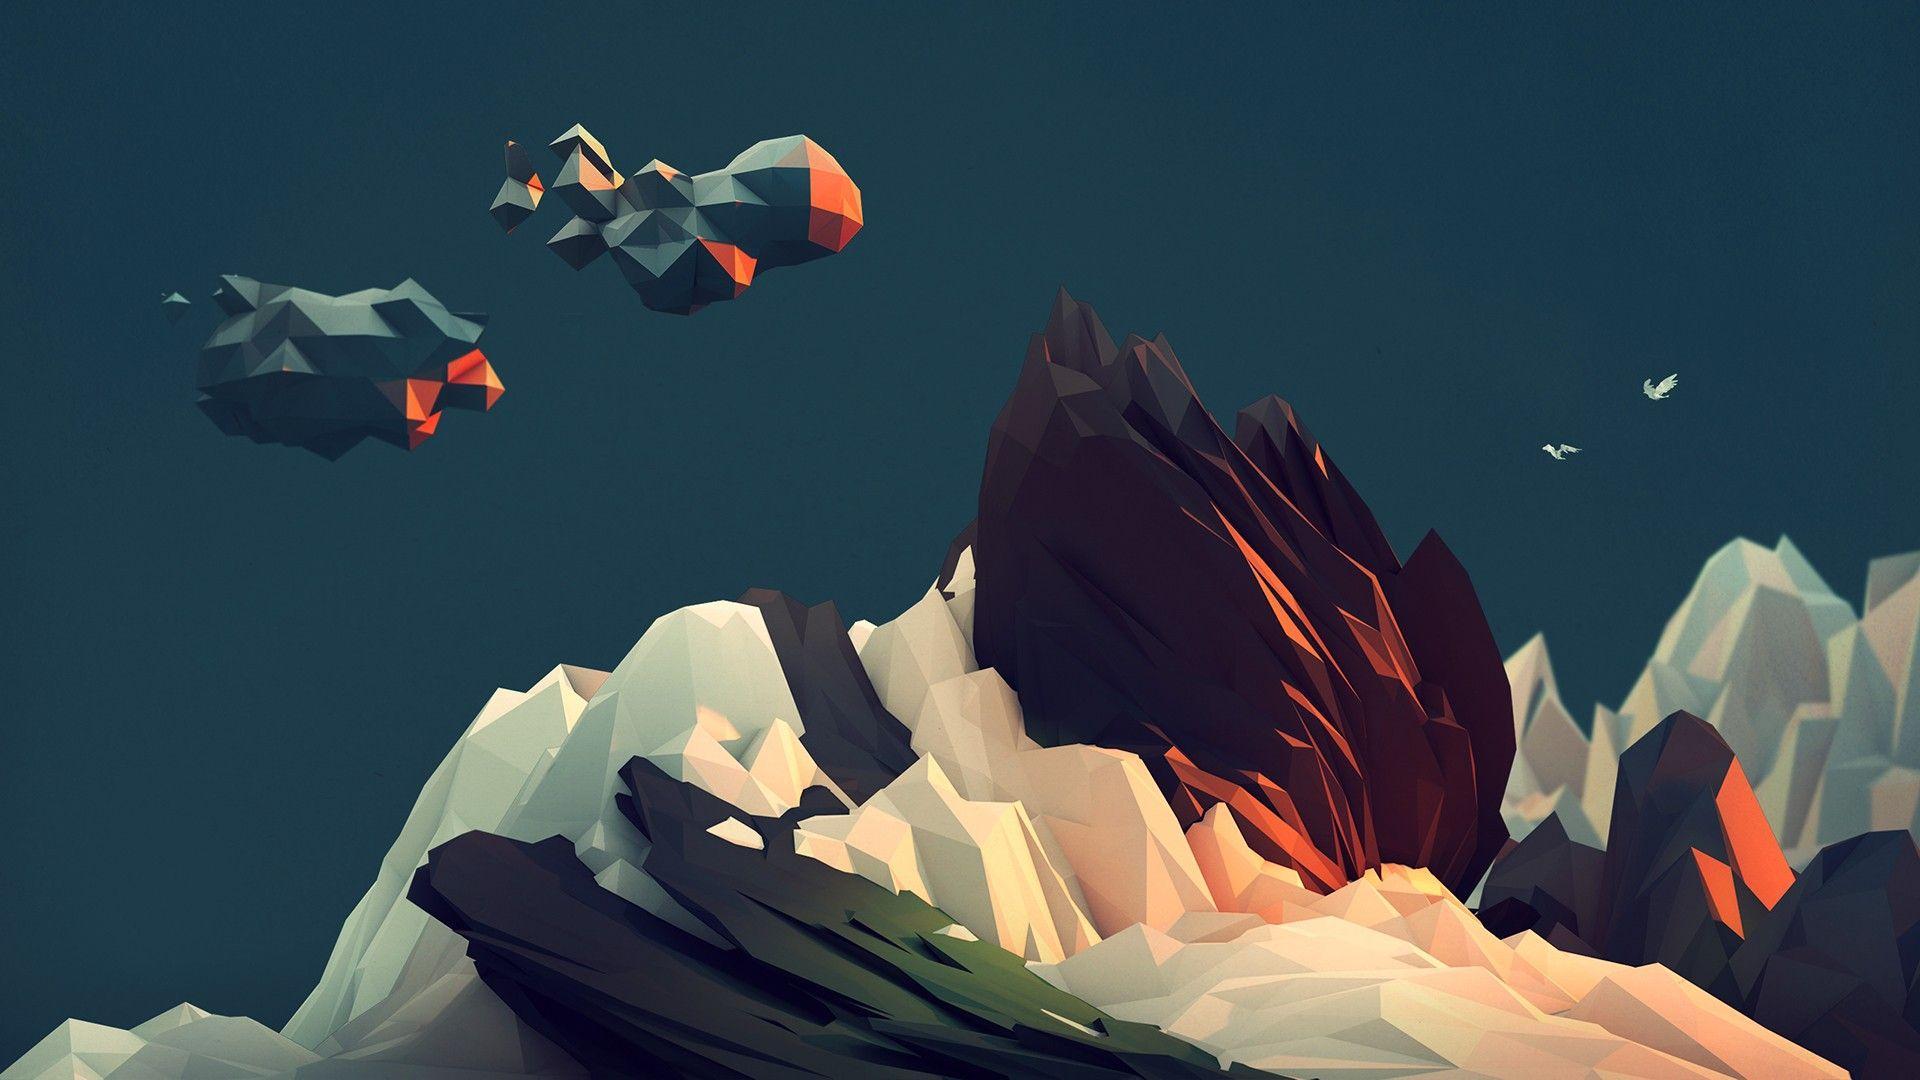 Low Poly Wallpapers Wallpaper Cave Images, Photos, Reviews